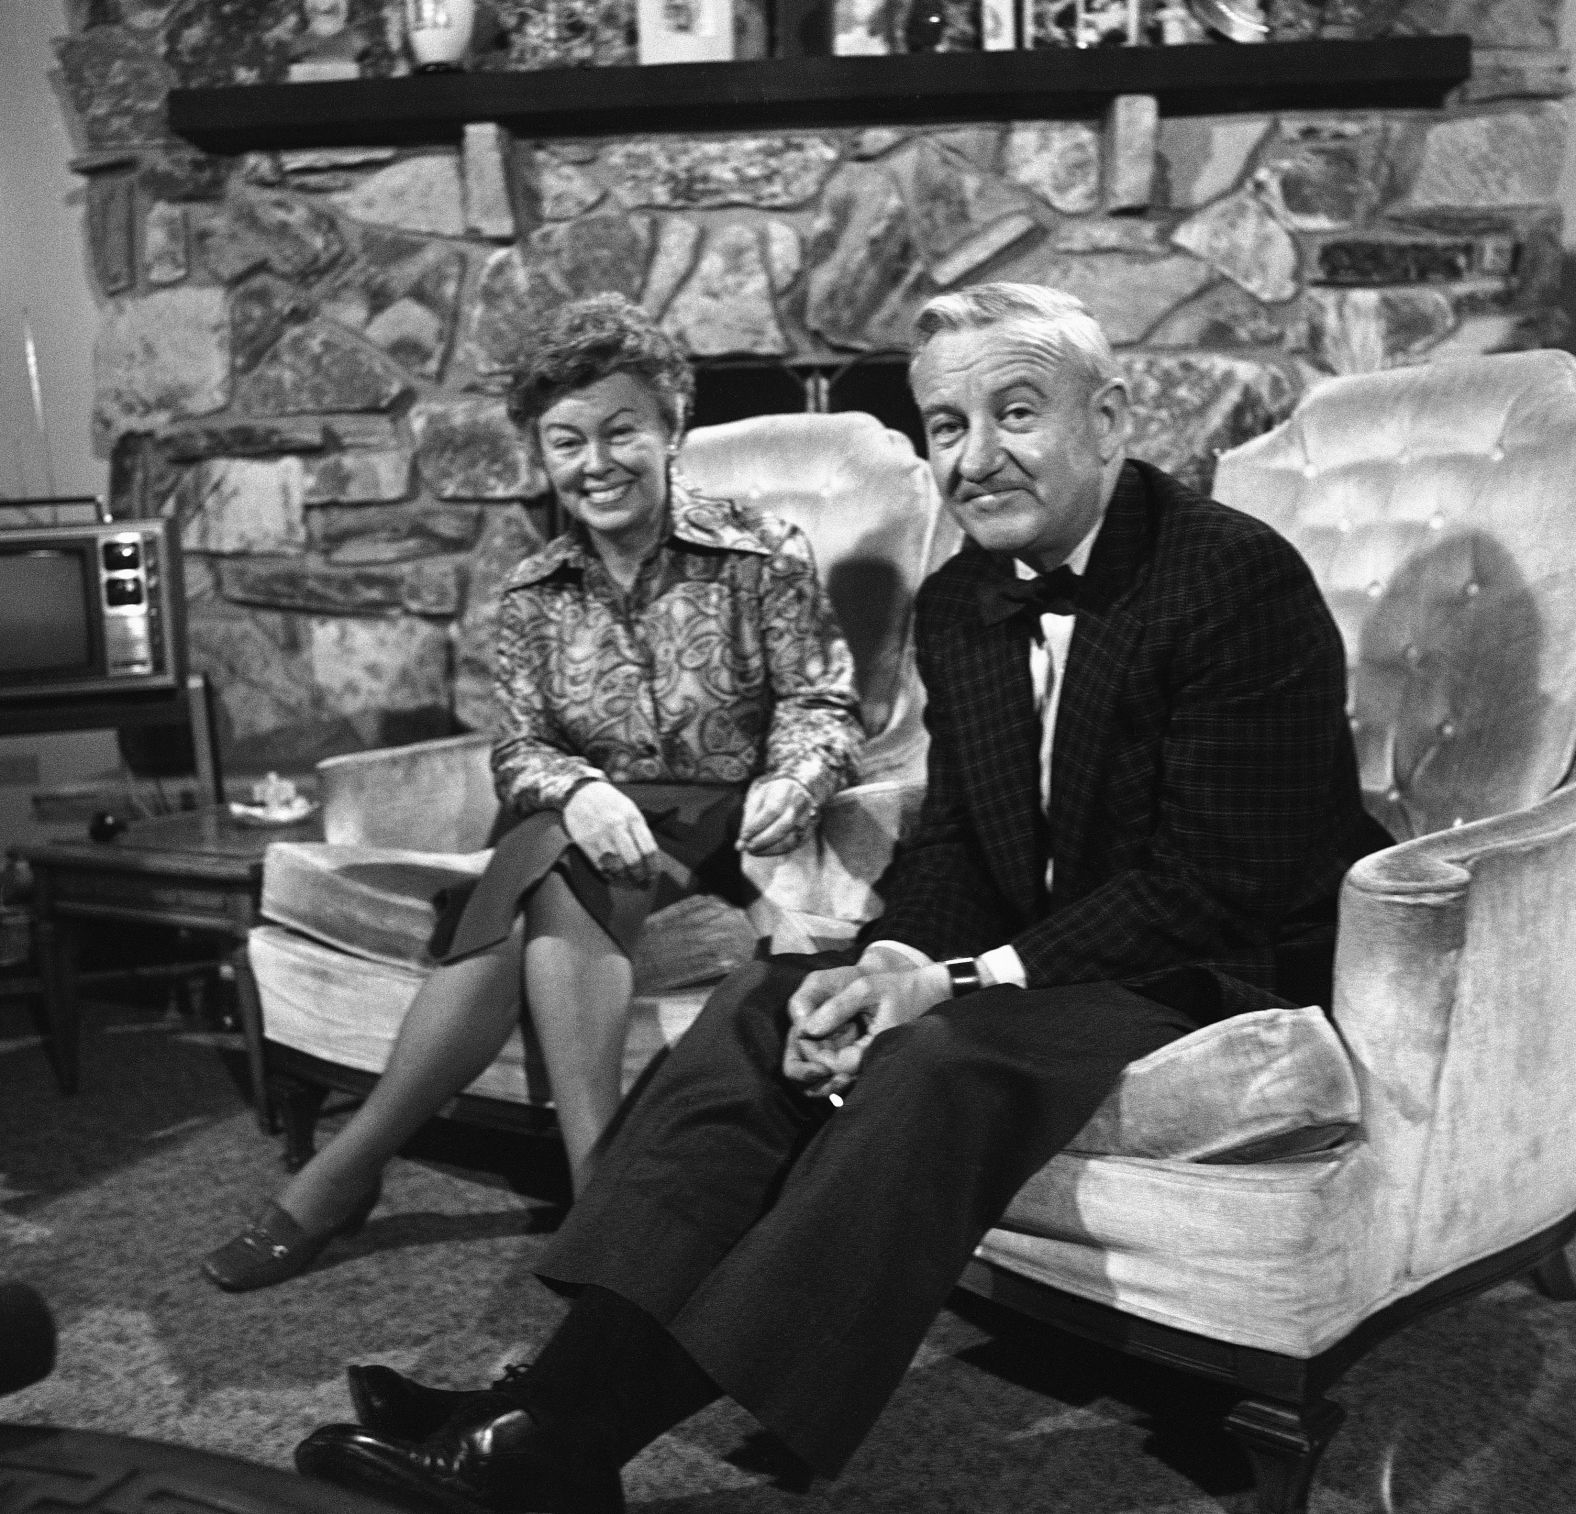 Stevens, right, relaxes with his wife, Elizabeth, in their home in Burr Ridge, Illinois, on November 29, 1975. Stevens was nominated by President Gerald Ford to the vacancy on the Supreme Court of the United States.